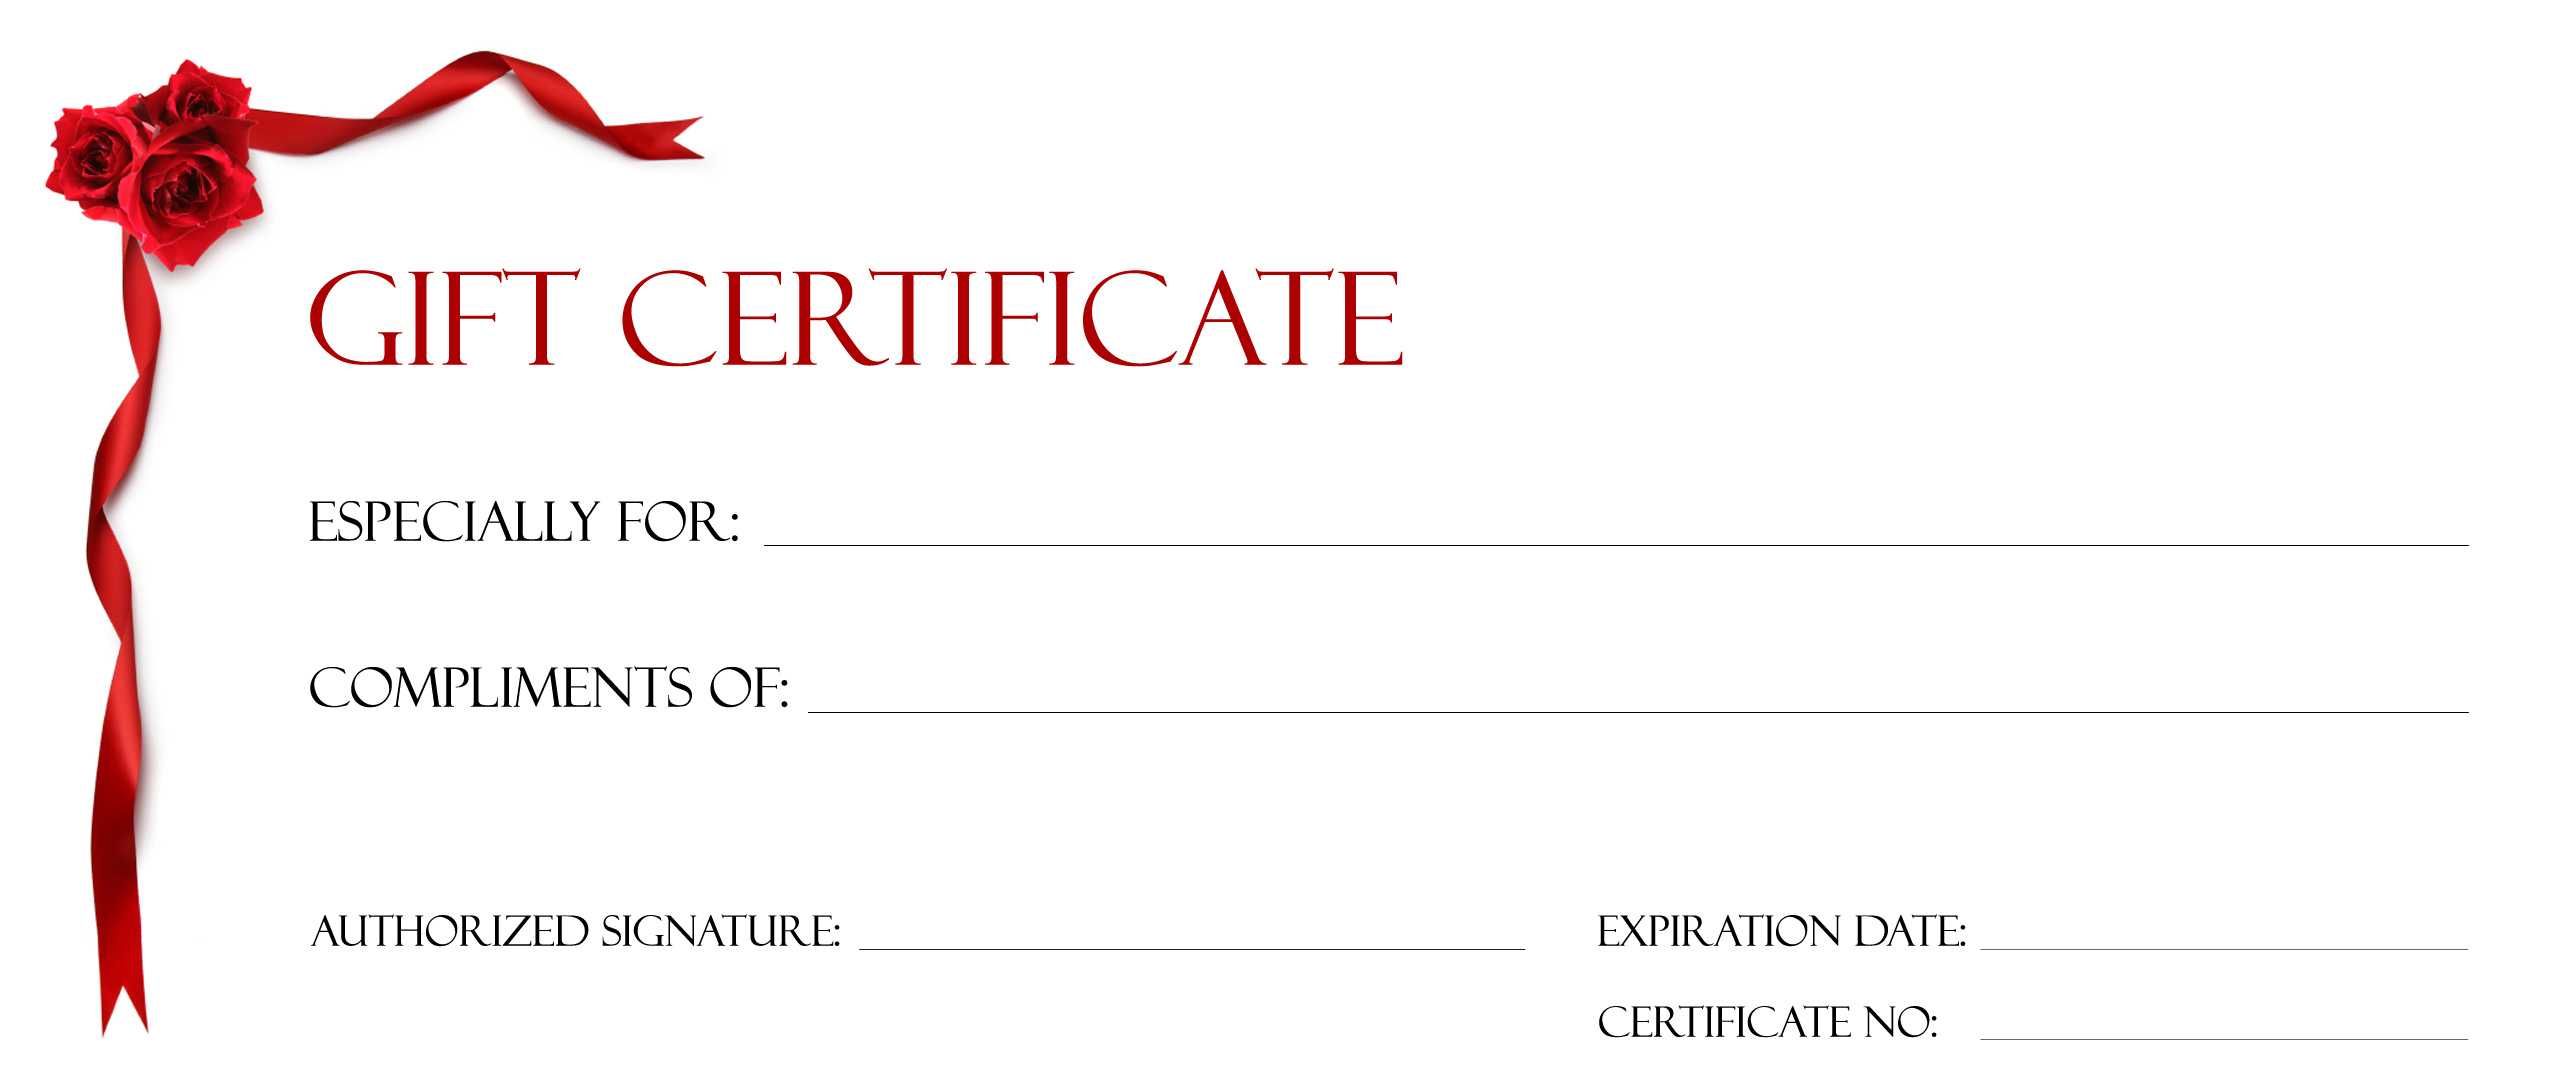 Gift Certificate Template Microsoft Publisher Intended For Publisher Gift Certificate Template